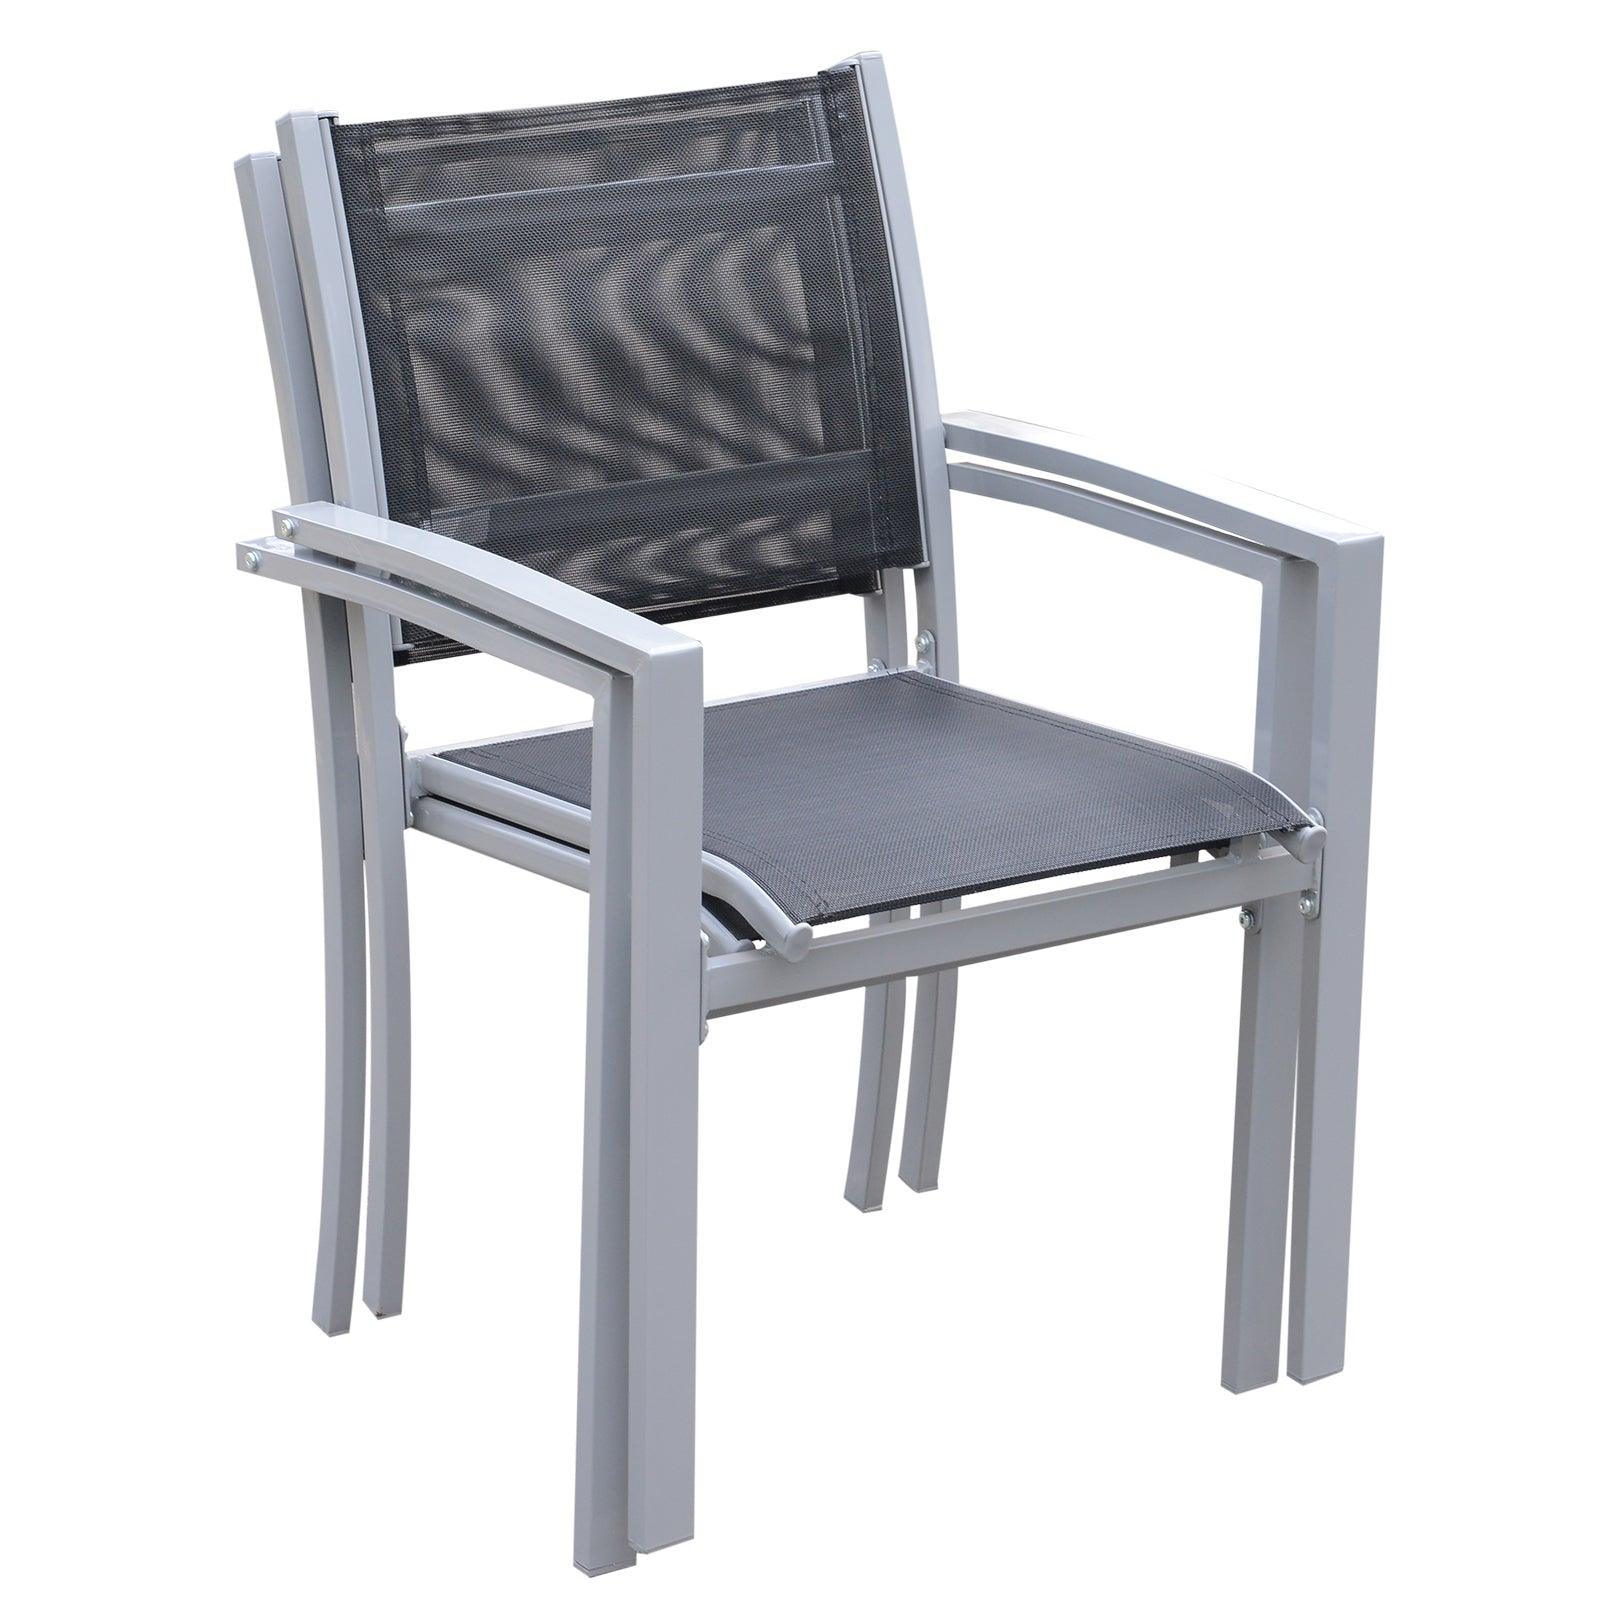 Outsunny Outdoor Chairs: Steel Frame, Texteline Seats, Black/Grey - ALL4U RETAILER LTD